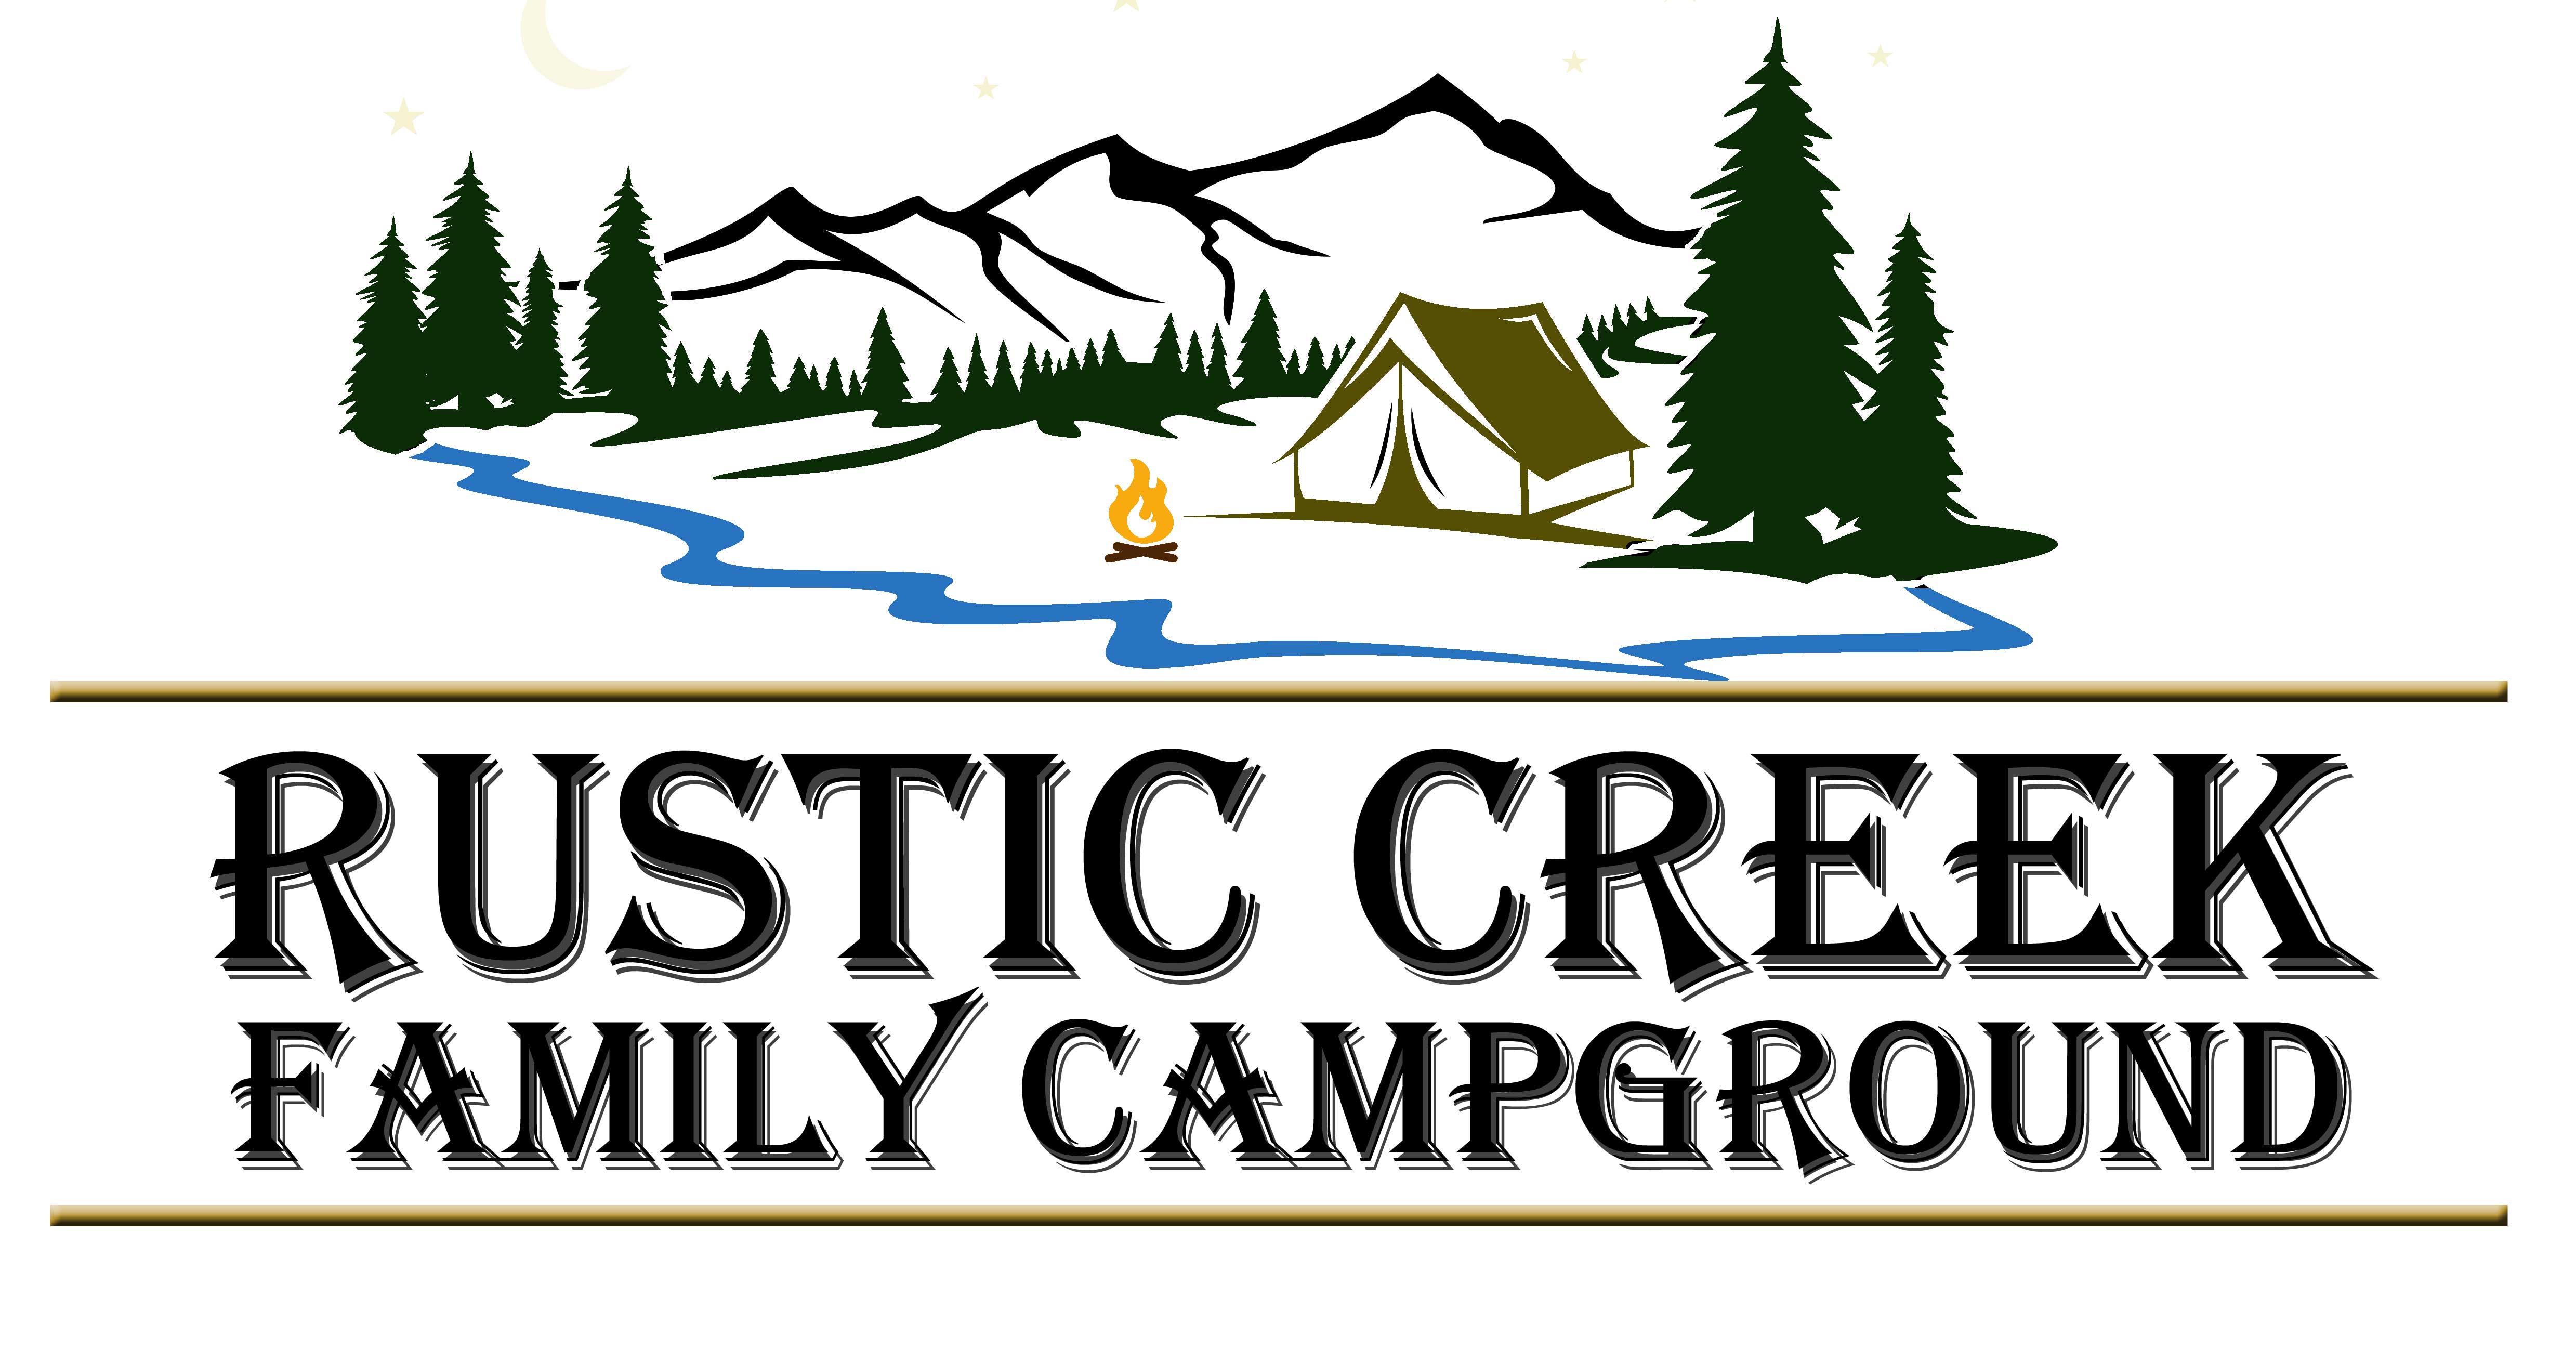 Cozy Creek Family Campground